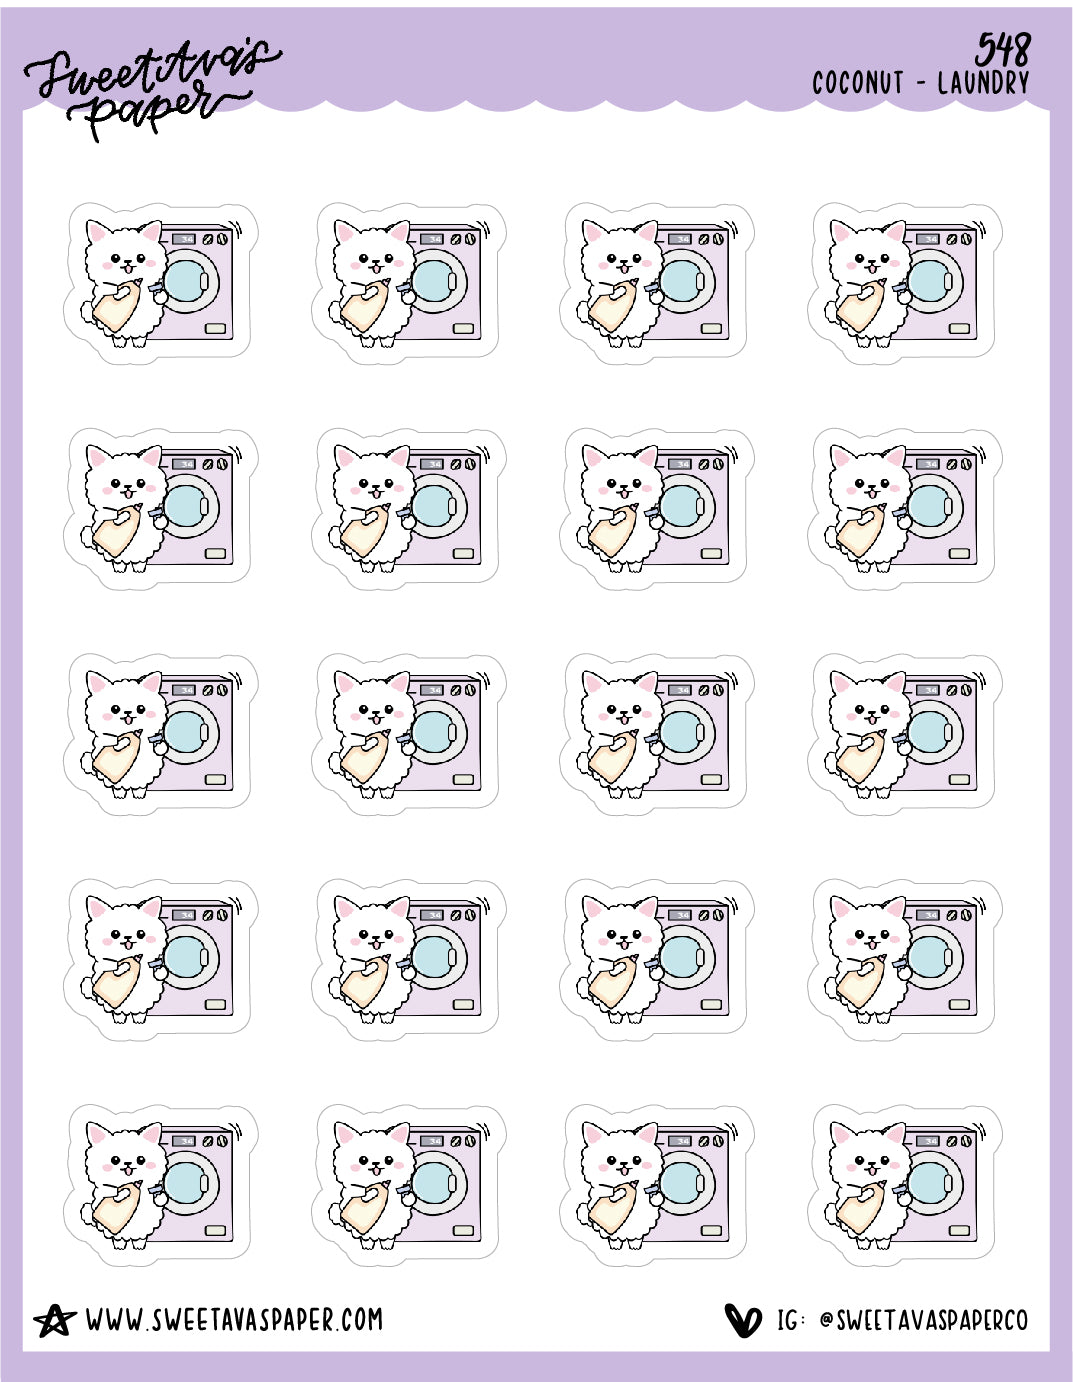 Laundry Planner Stickers - Coconut the Puppy [548]